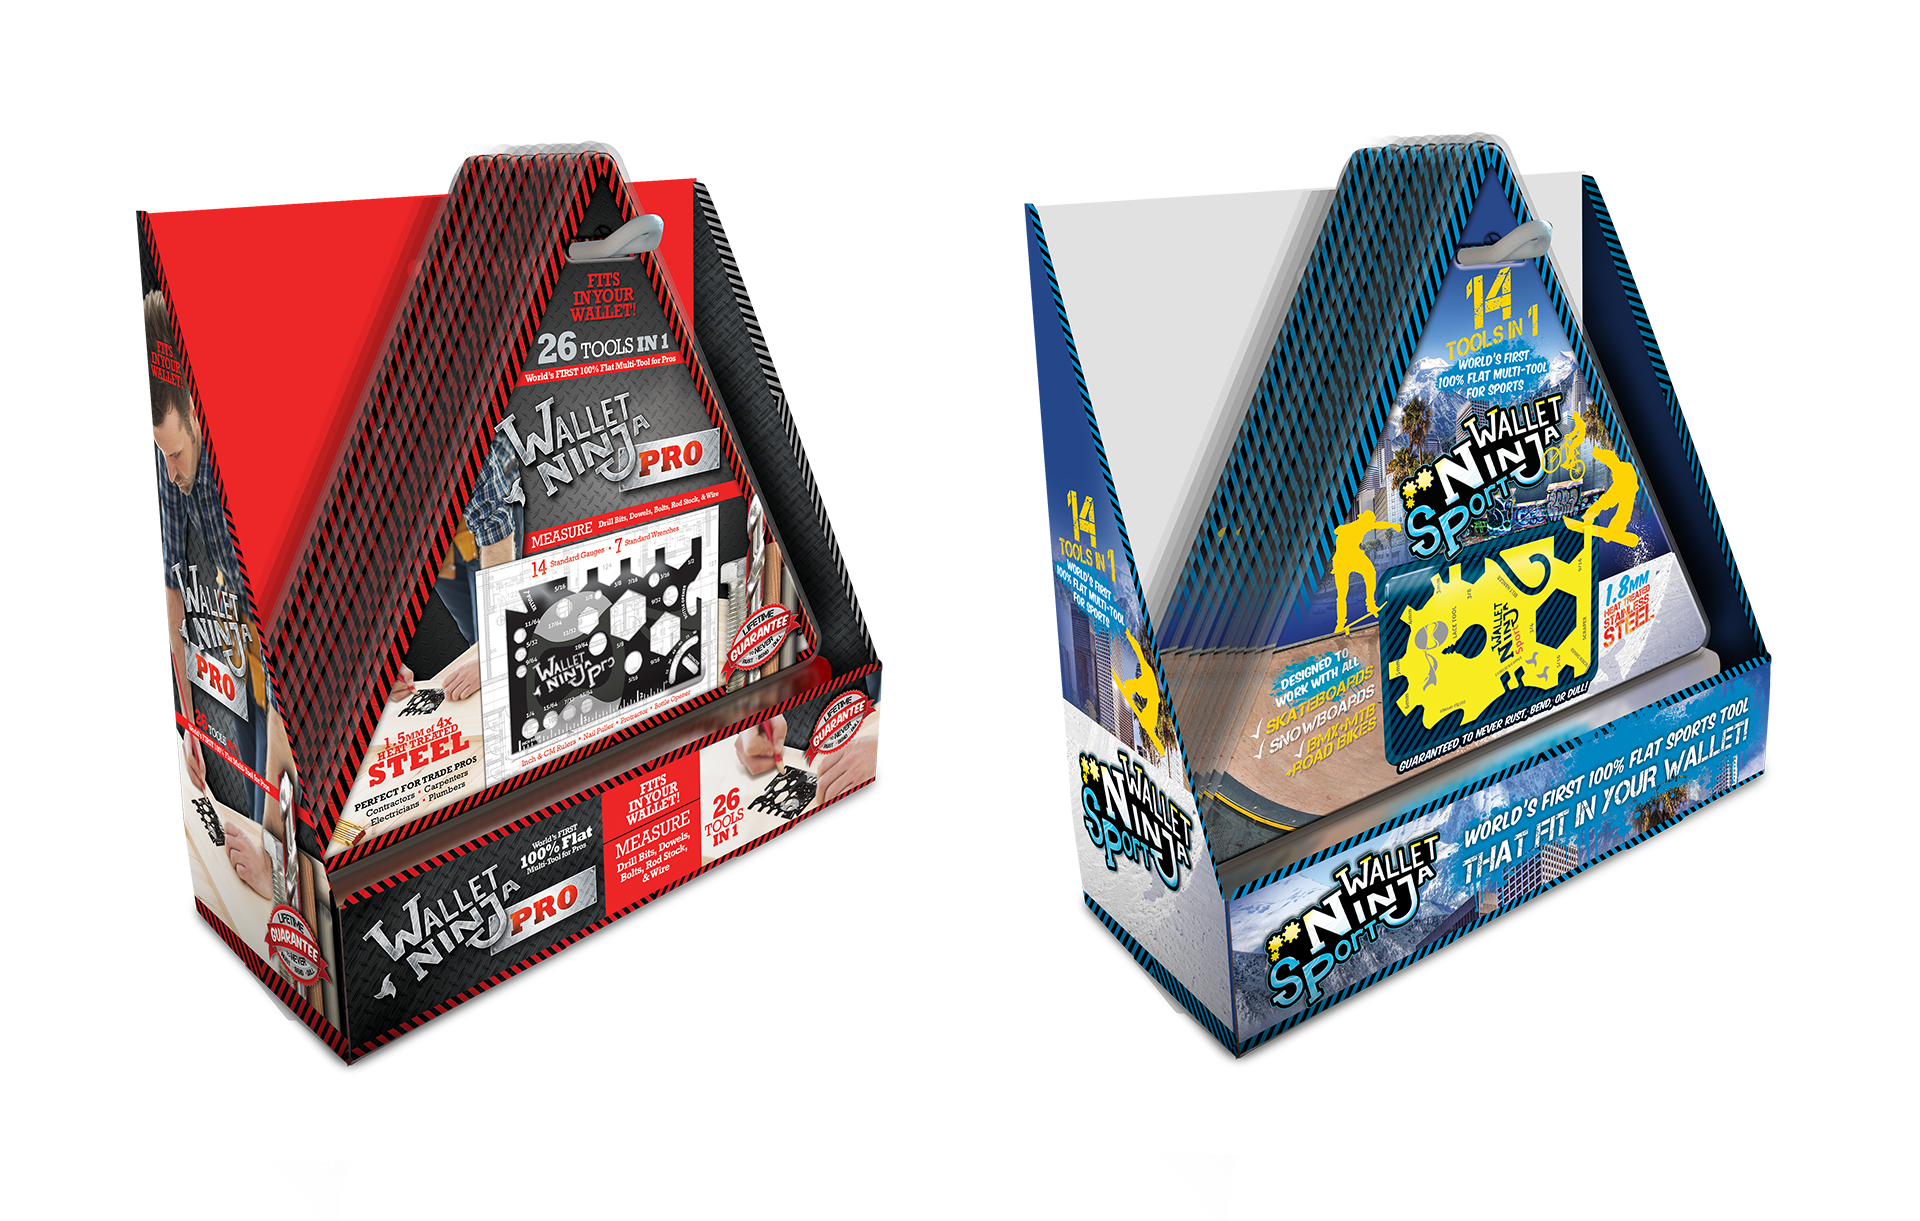 Wallet Ninja Pro and Sport Product Packaging Design by Scott Luscombe of Creatibly